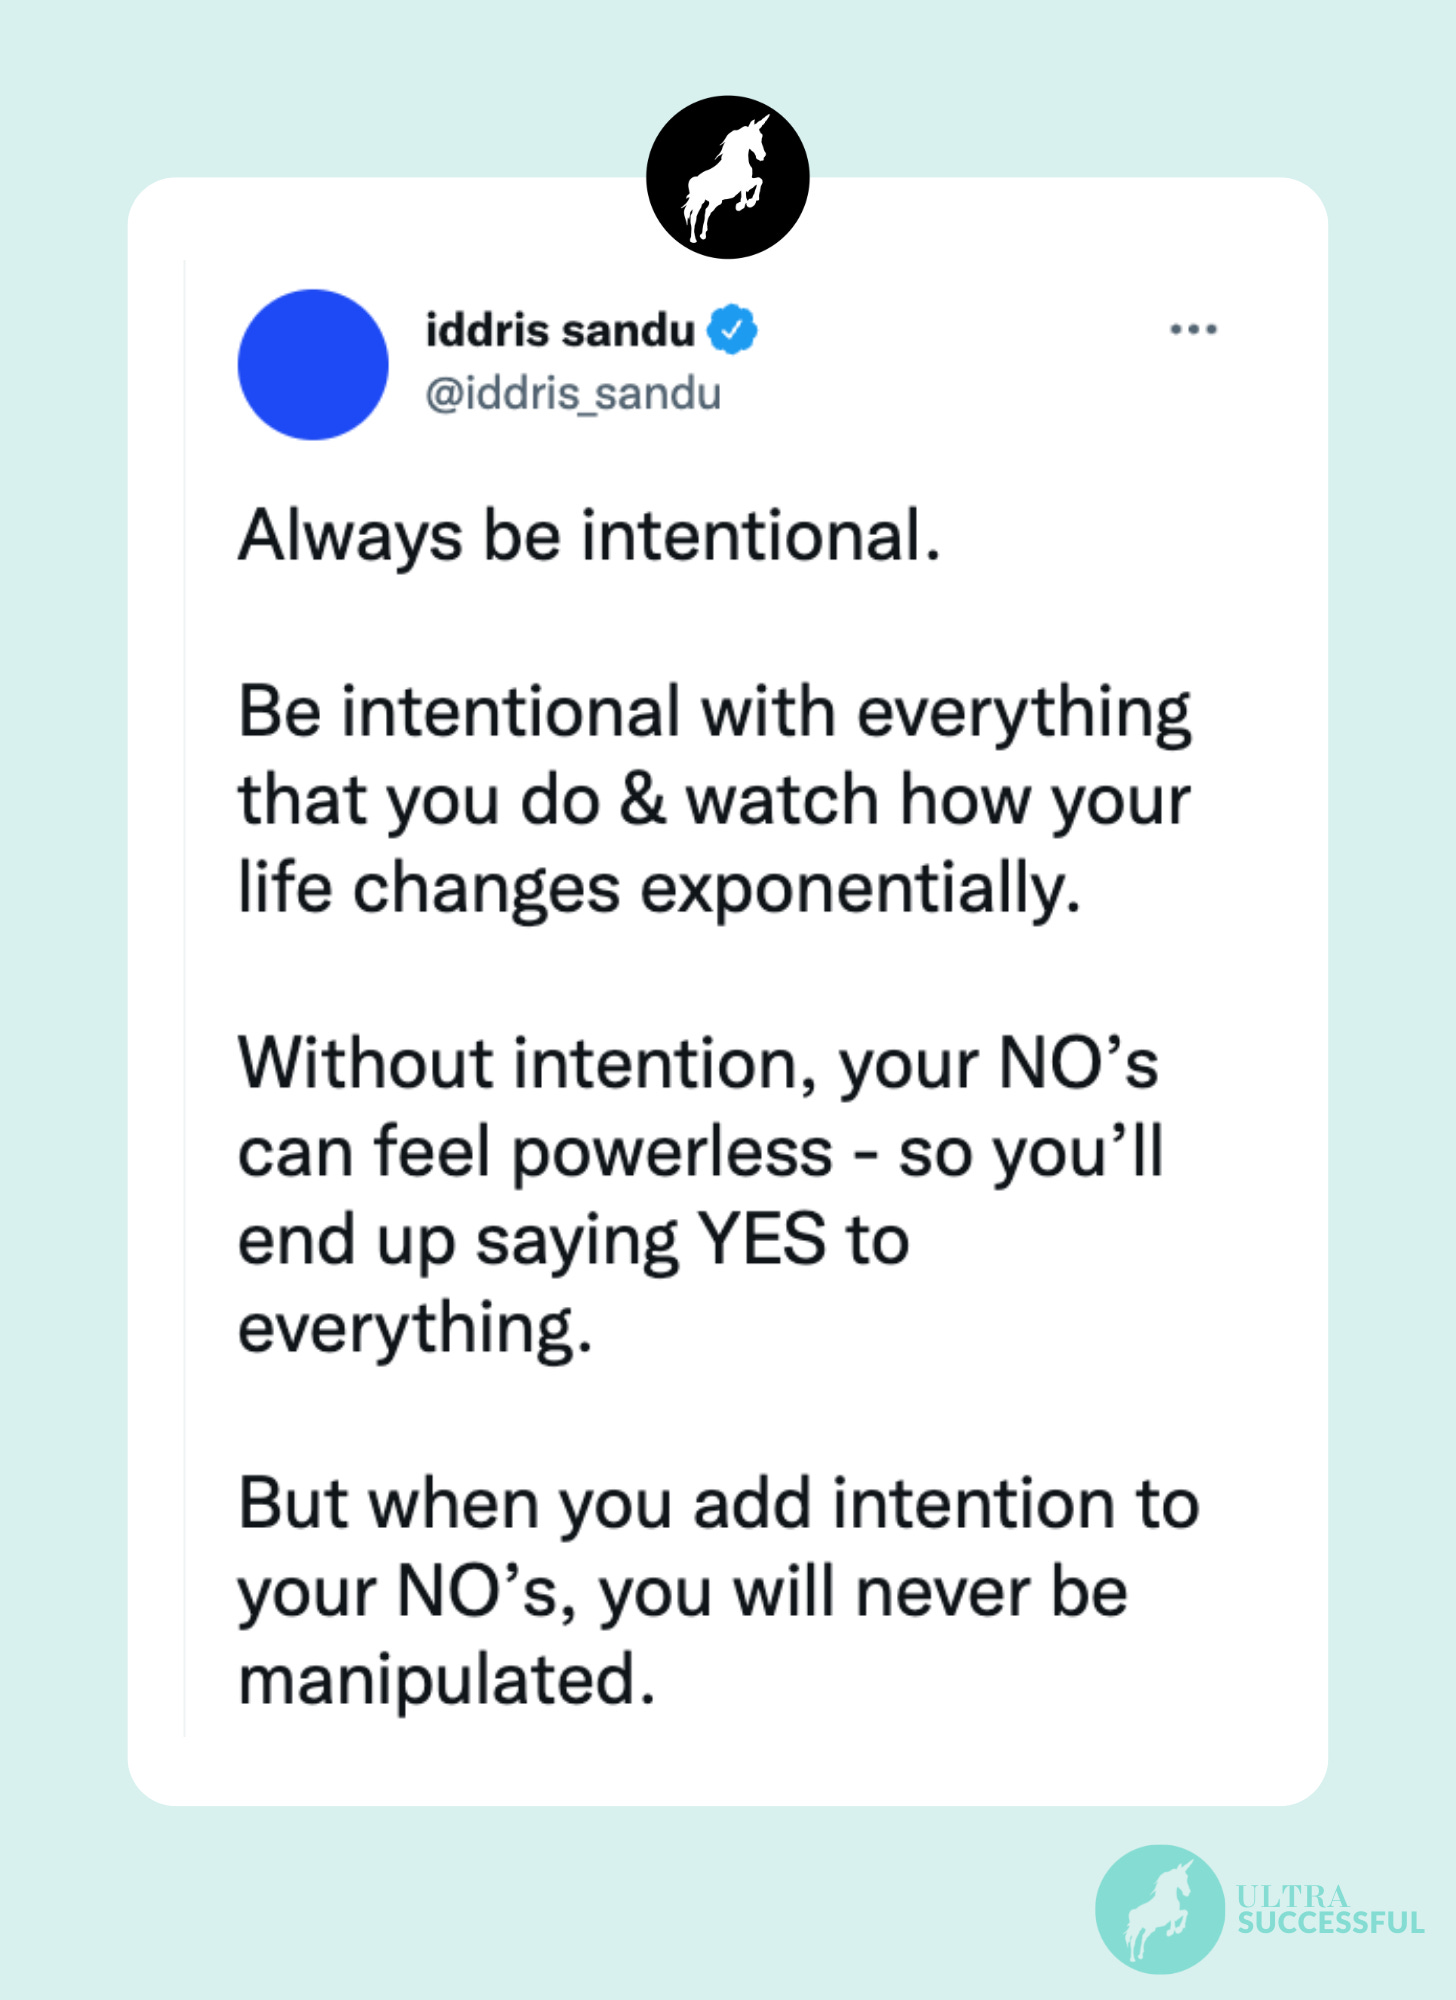 @iddris_sandu: Always be intentional.  Be intentional with everything that you do & watch how your life changes exponentially.  Without intention, your NO’s can feel powerless - so you’ll end up saying YES to everything.  But when you add intention to your NO’s, you will never be manipulated.